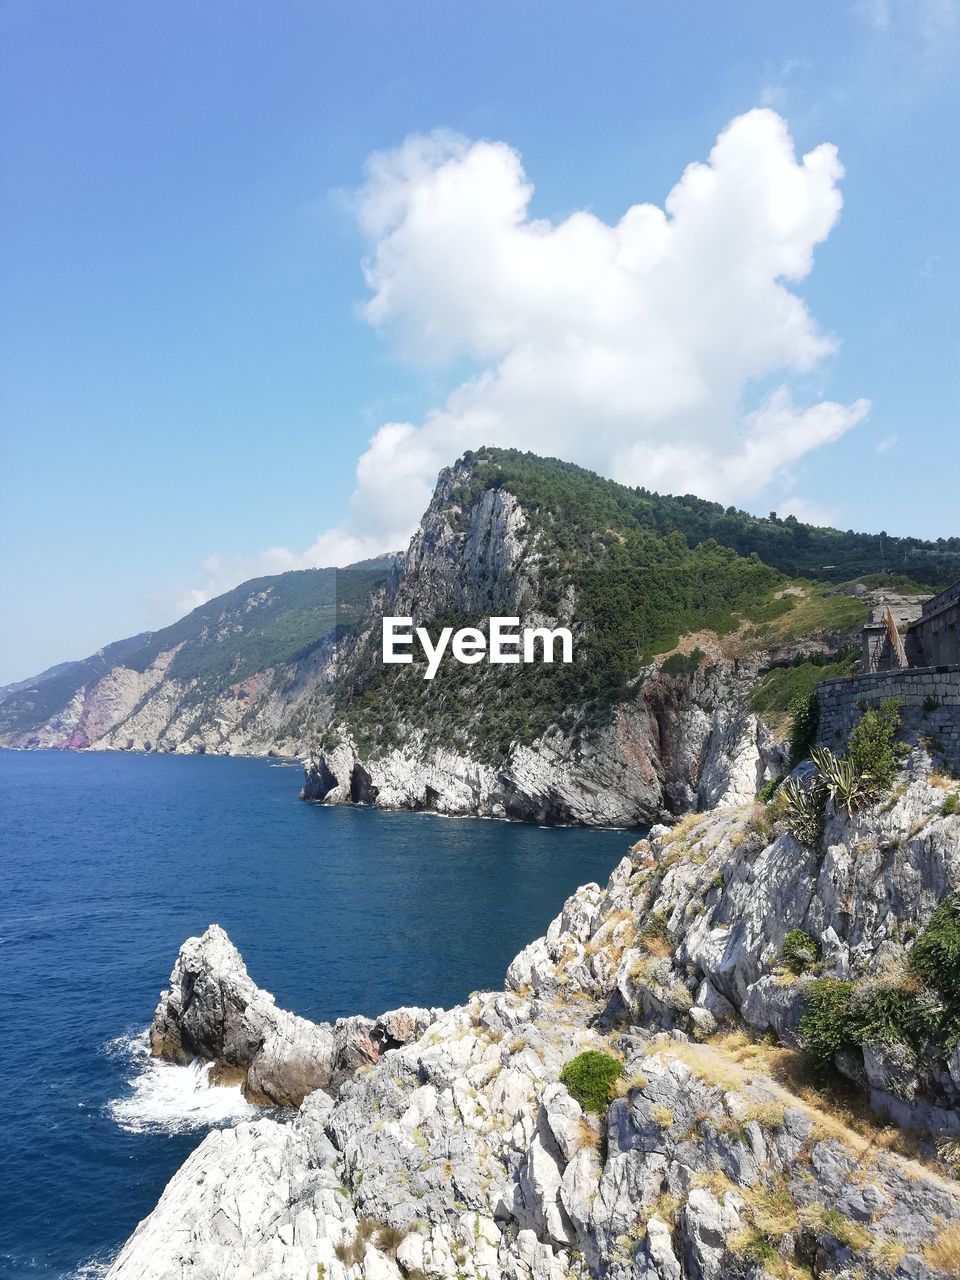 Scenic view of sea, mountains, and a rocky coastline against sky